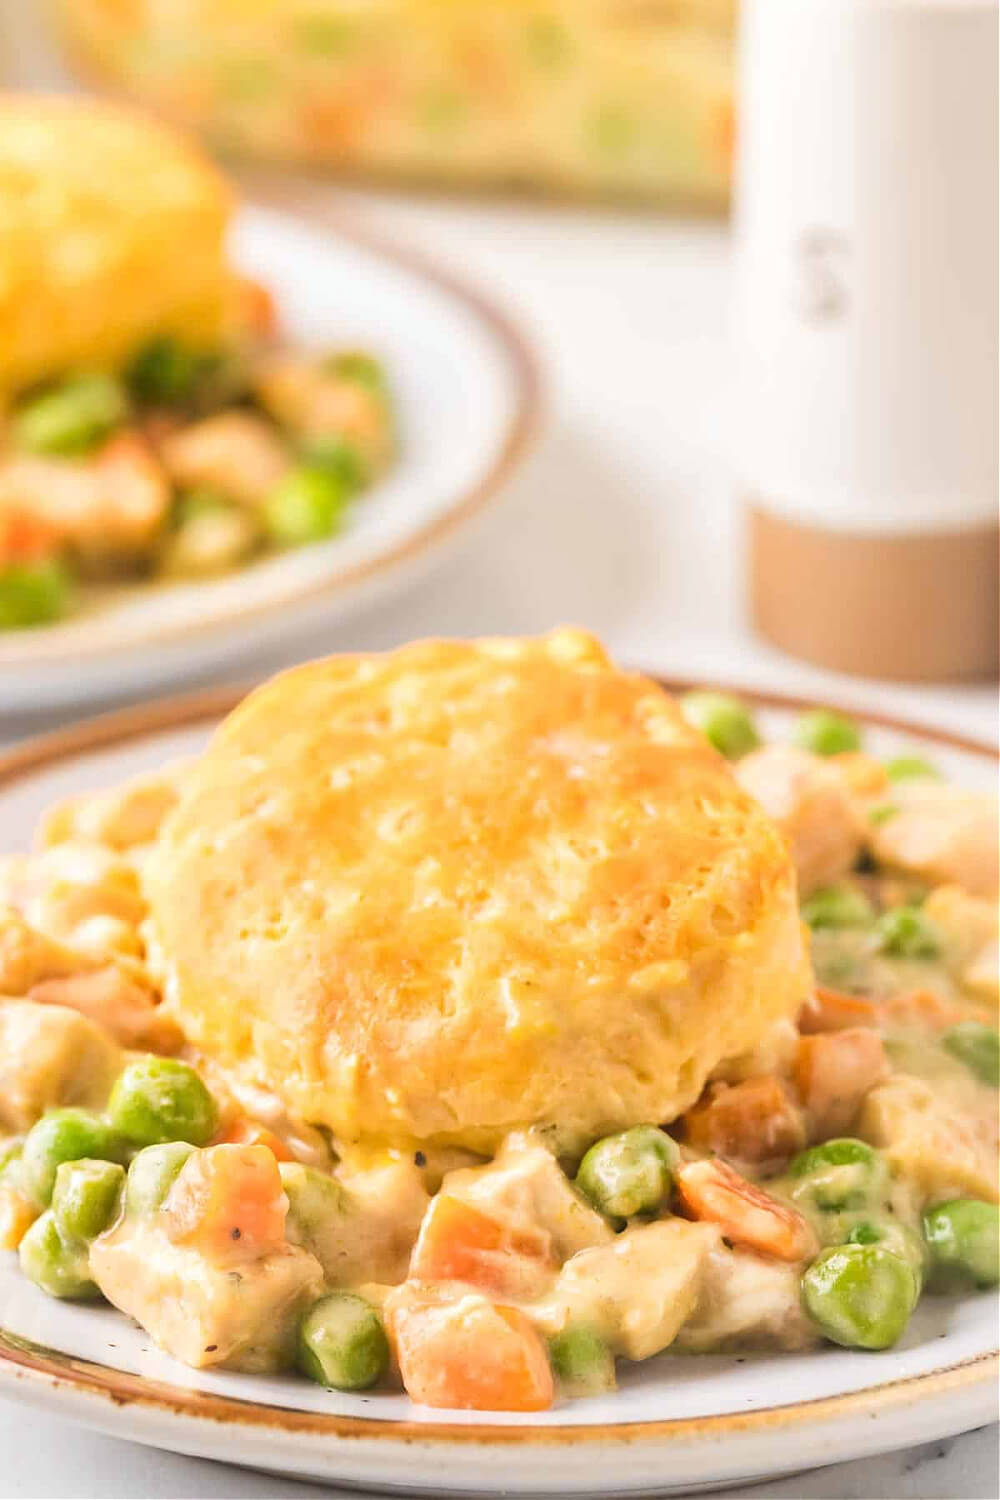 In The Love Of Home Files #11, easy chicken pot pie